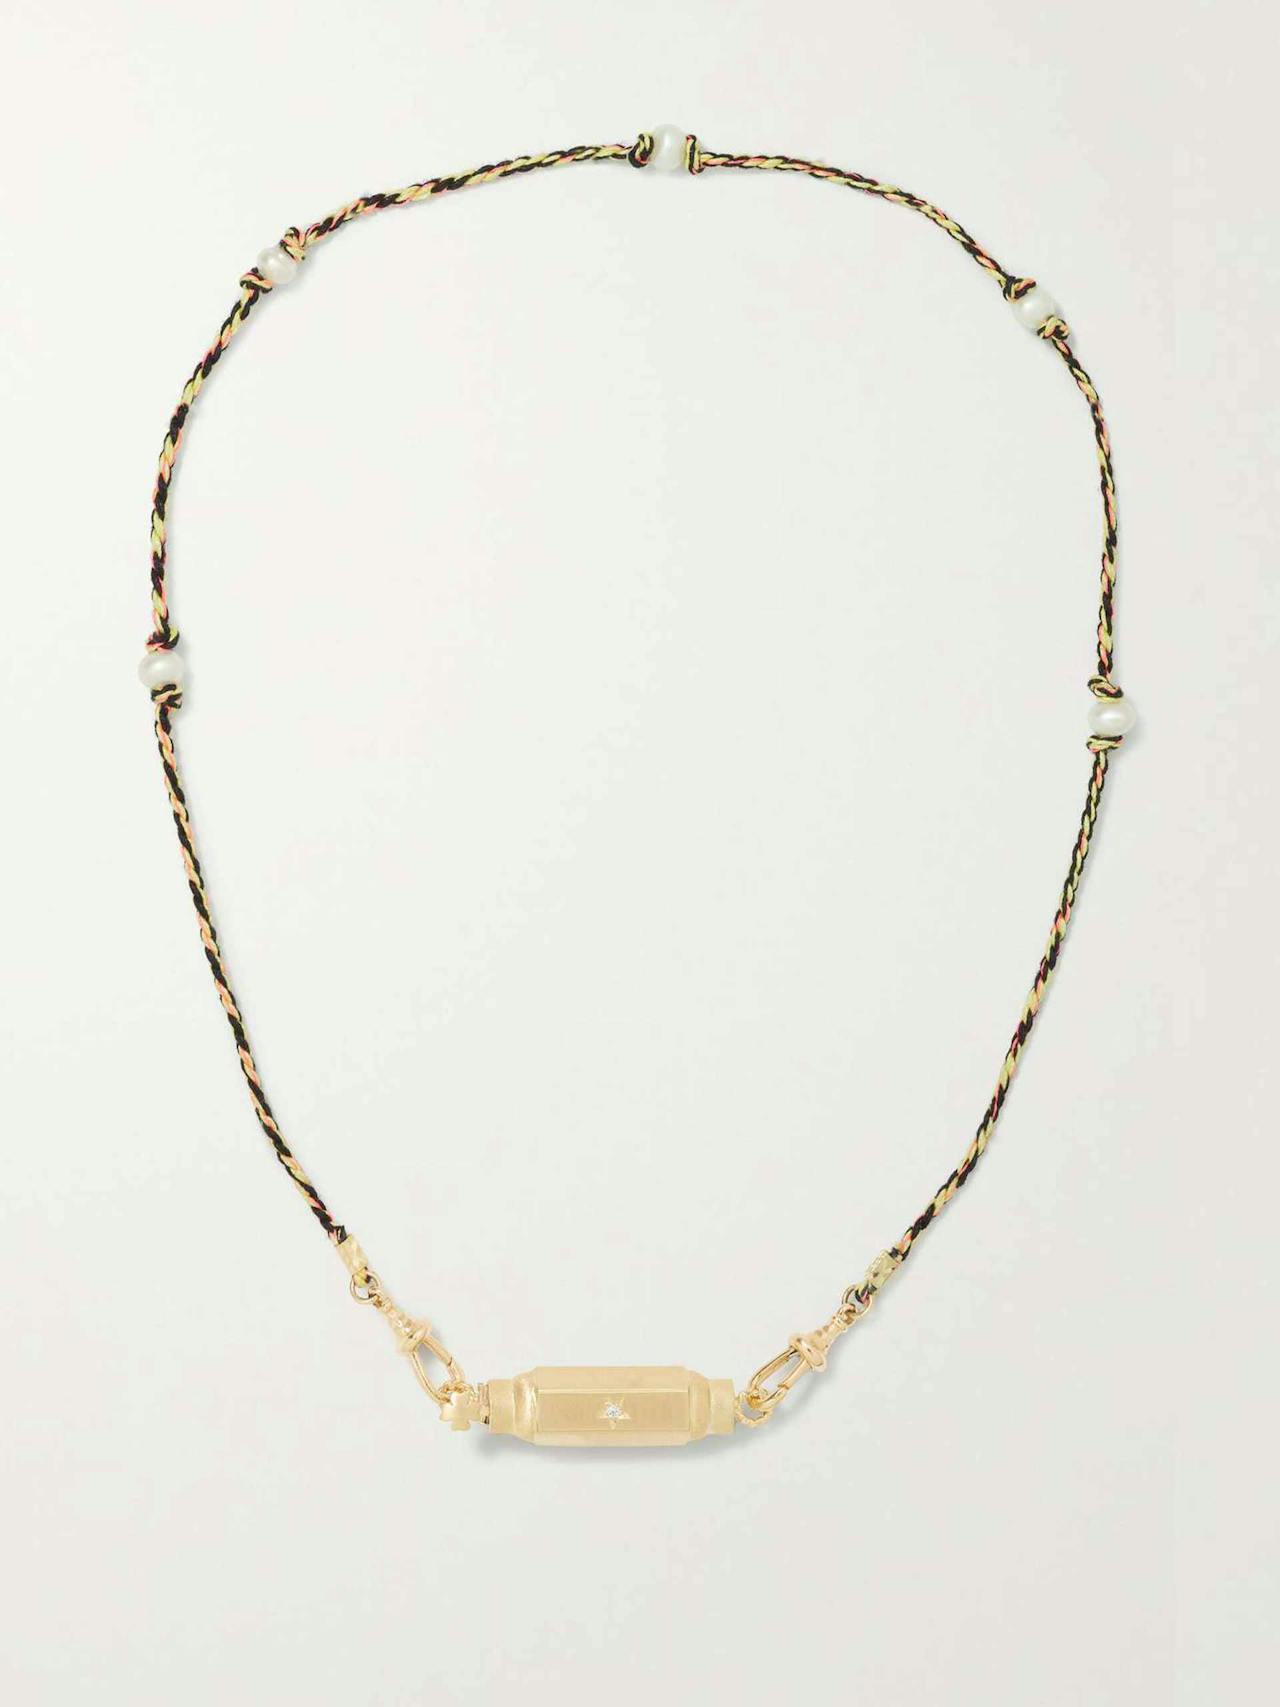 14kt gold, diamond and pearl cord necklace